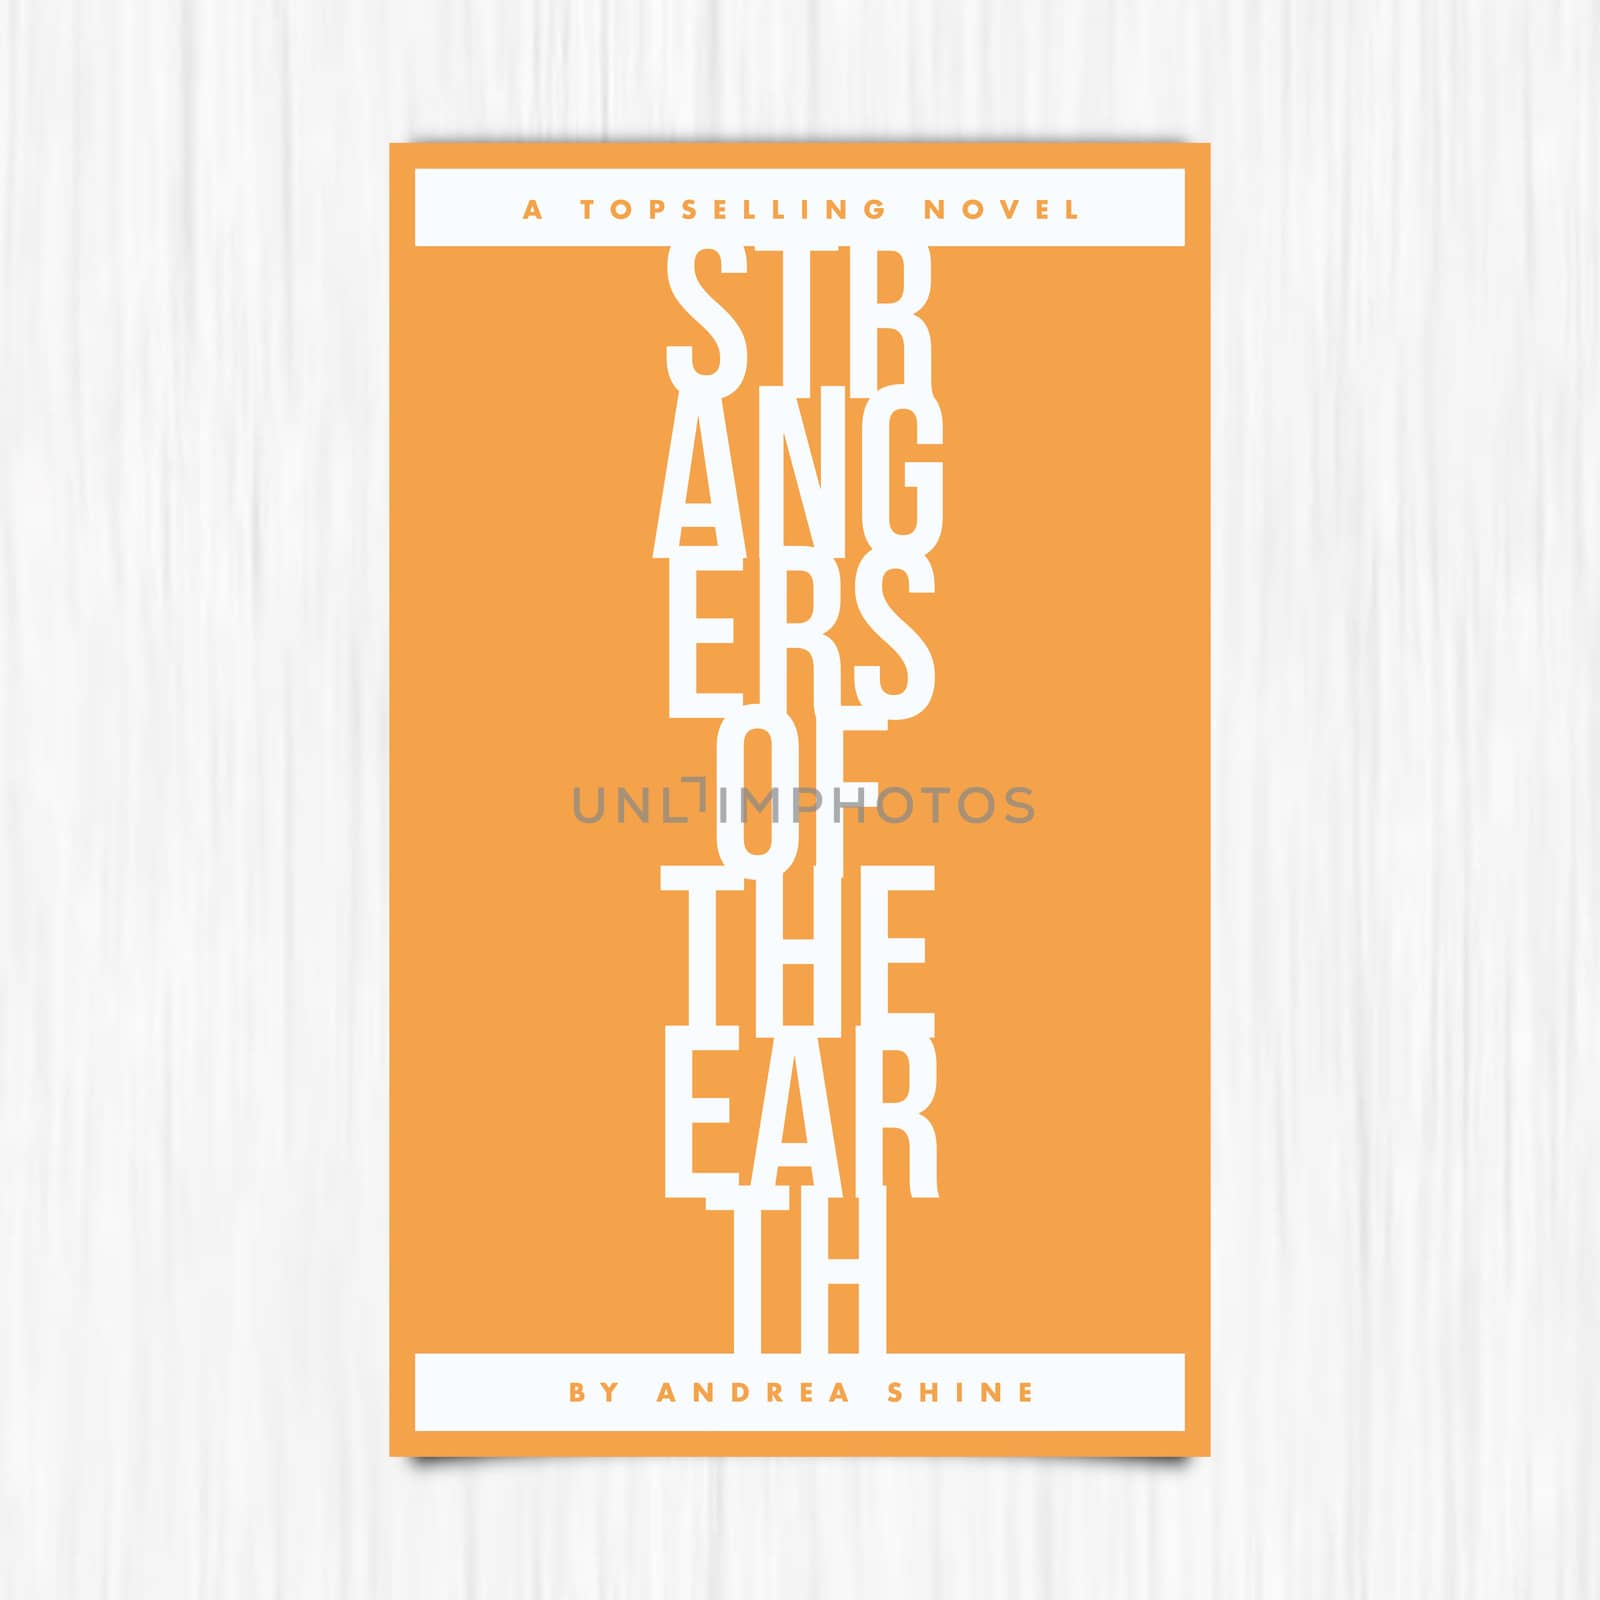 Vector of novel cover with strangers of the earth text by Wavebreakmedia